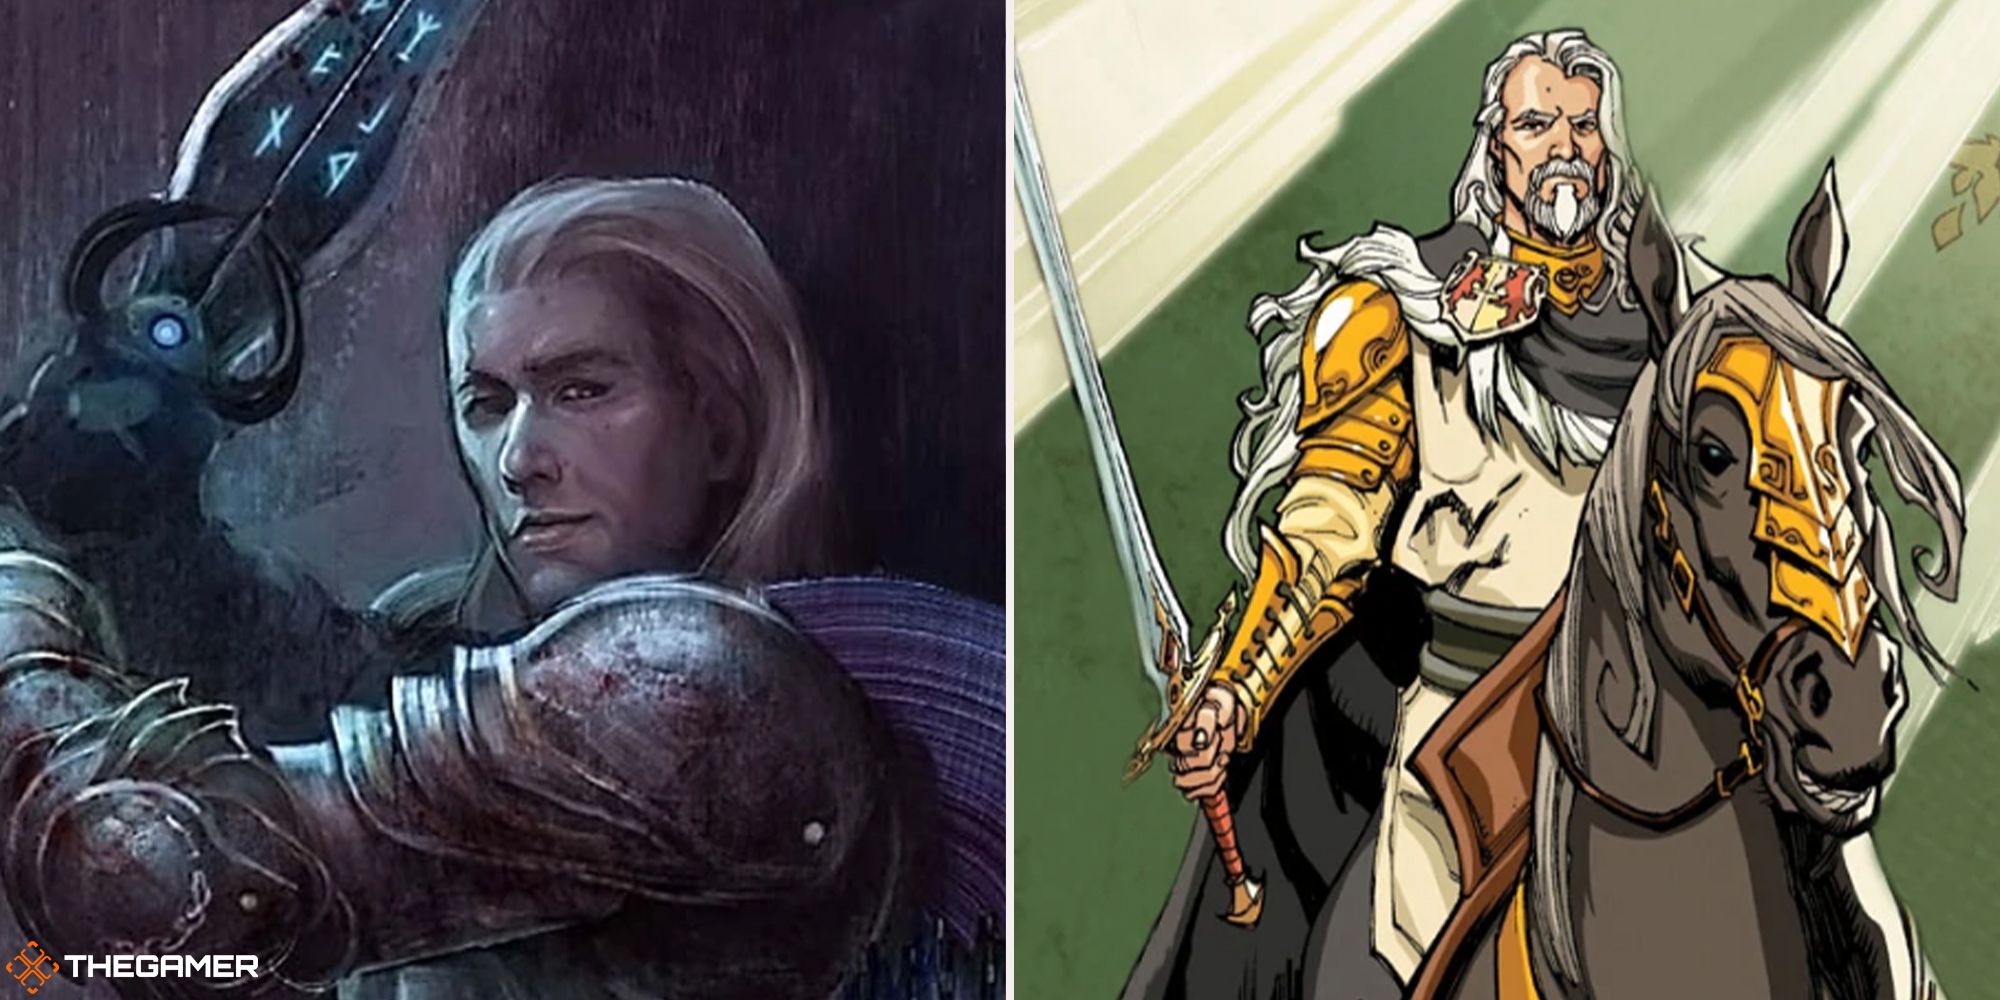 Dragon Age - King Maric (young, left) (old, right)